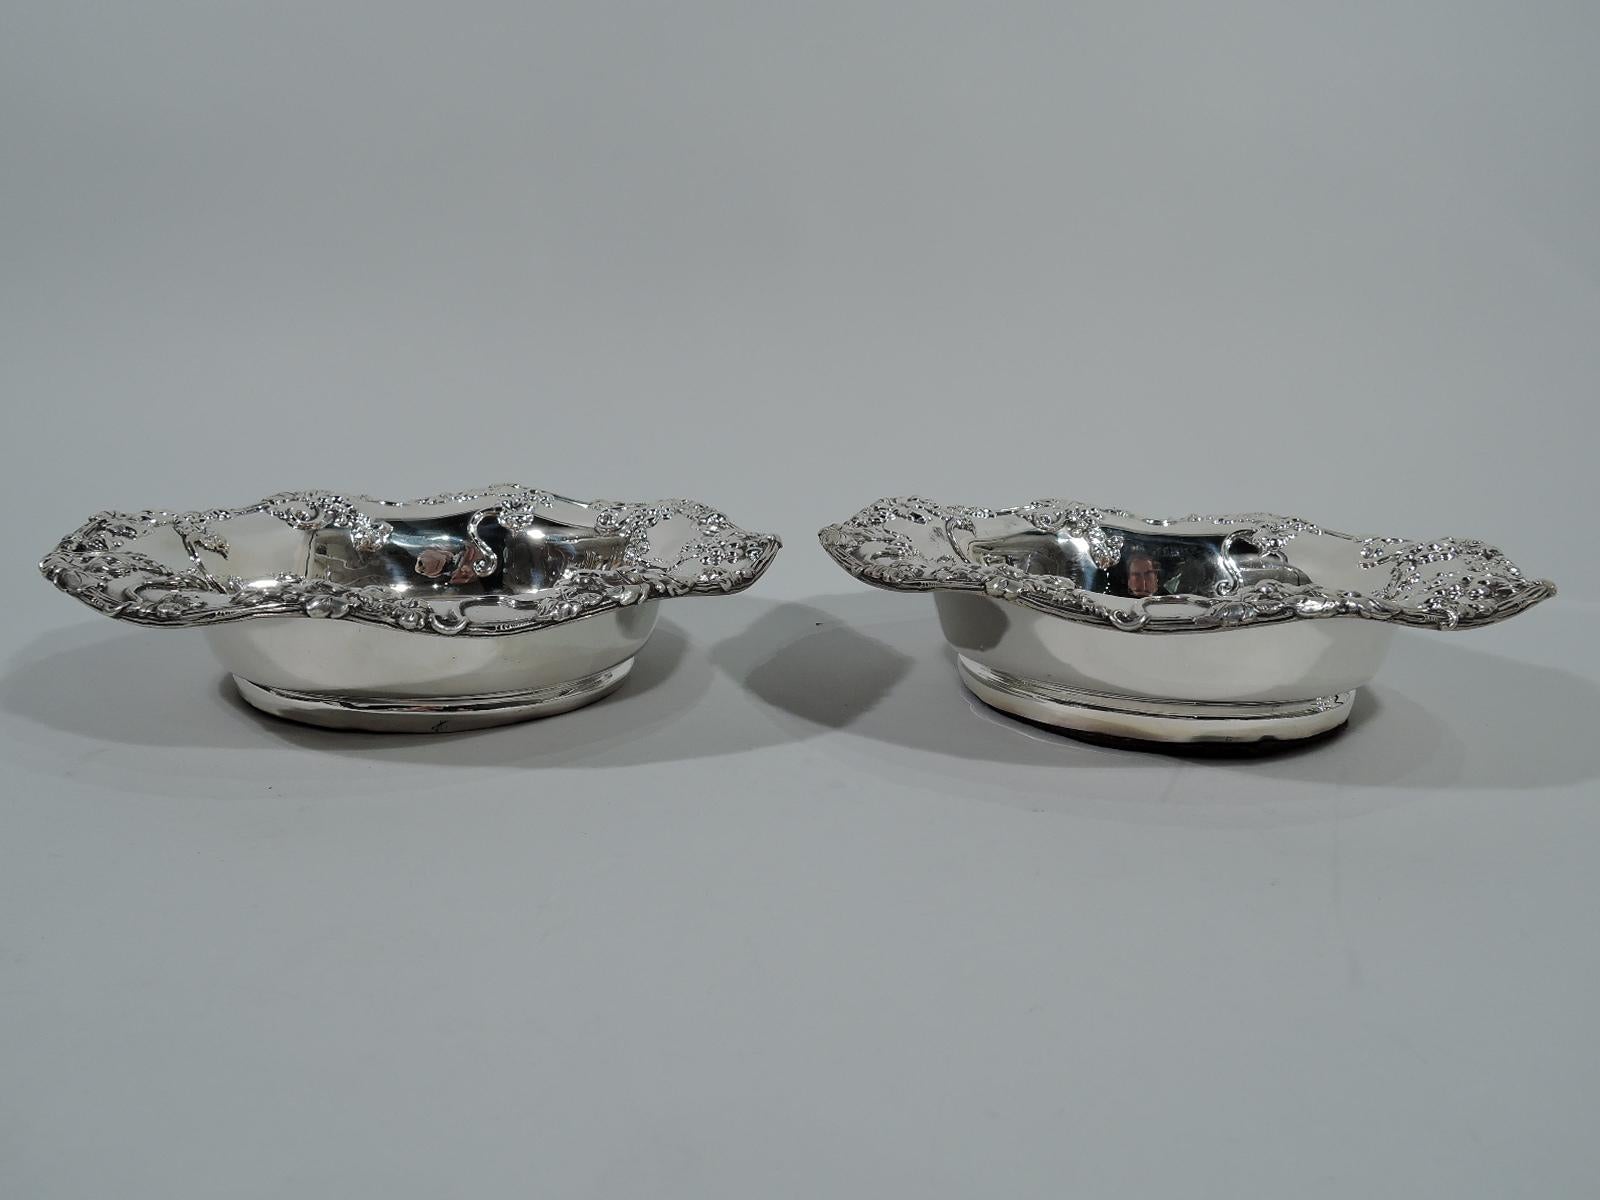 Pair of sterling silver wine bottle coasters. Made by Theodore B. Starr in New York, circa 1900. Tapering sides and wavy vine rim with applied grape bunches. Well stained, turned, and felt-lined wood. Hallmark includes maker’s stamp and no.